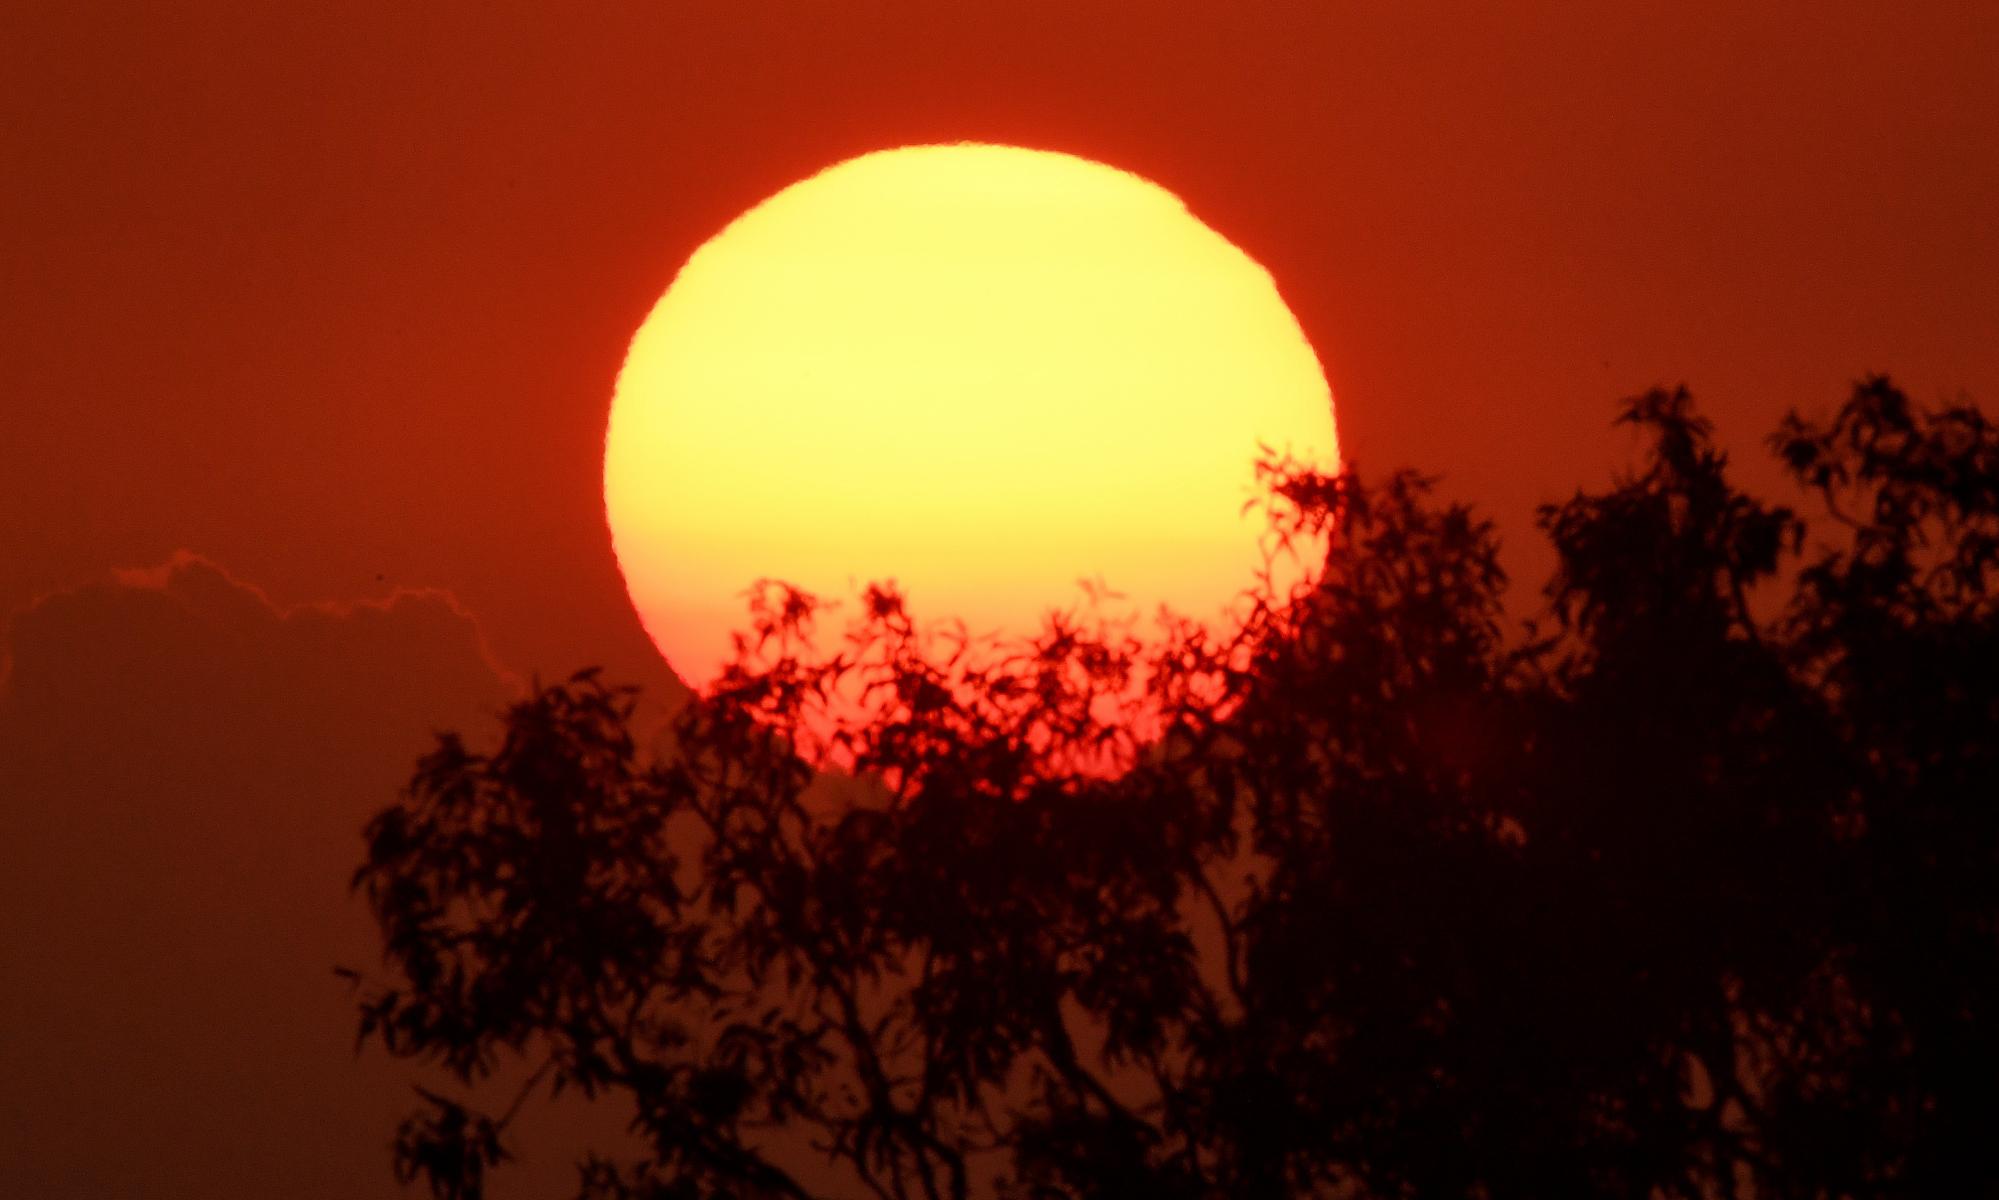 Northern Australia could have dangerously high heat most days of the year by 2100, study finds